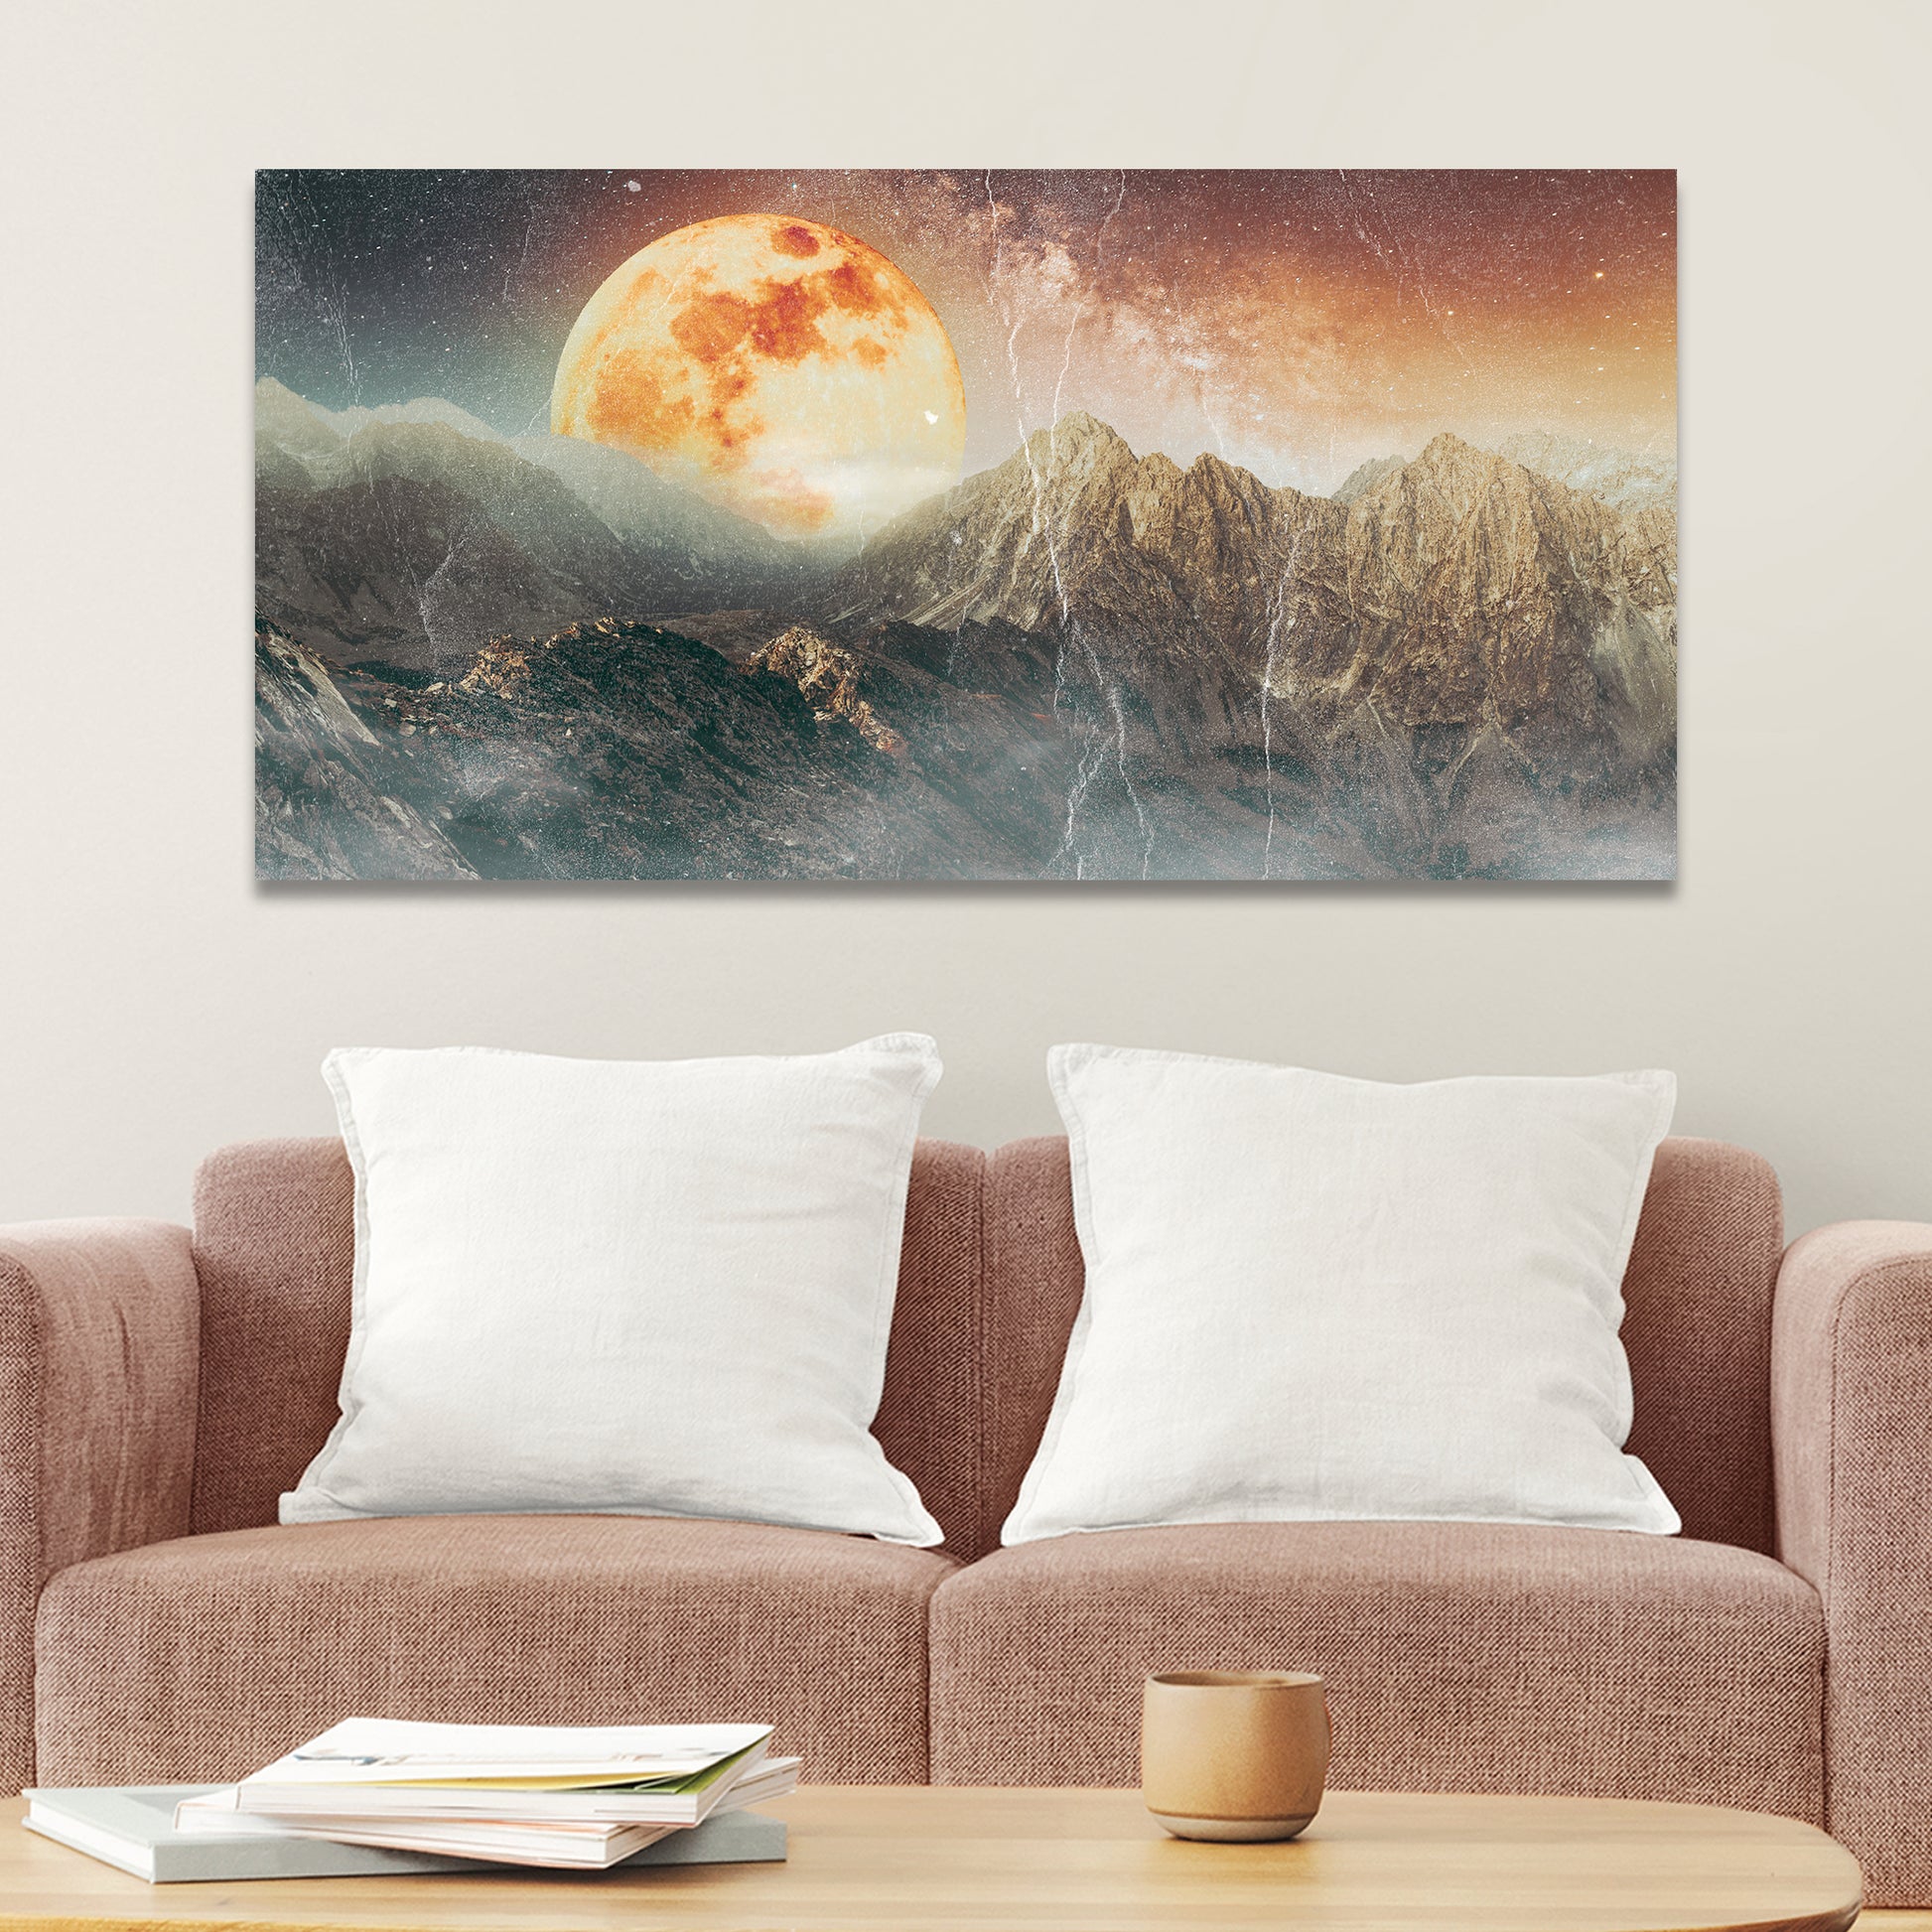 Orange Full Moon Behind Mountain Range Canvas Wall Art Style 2 - Image by Tailored Canvases